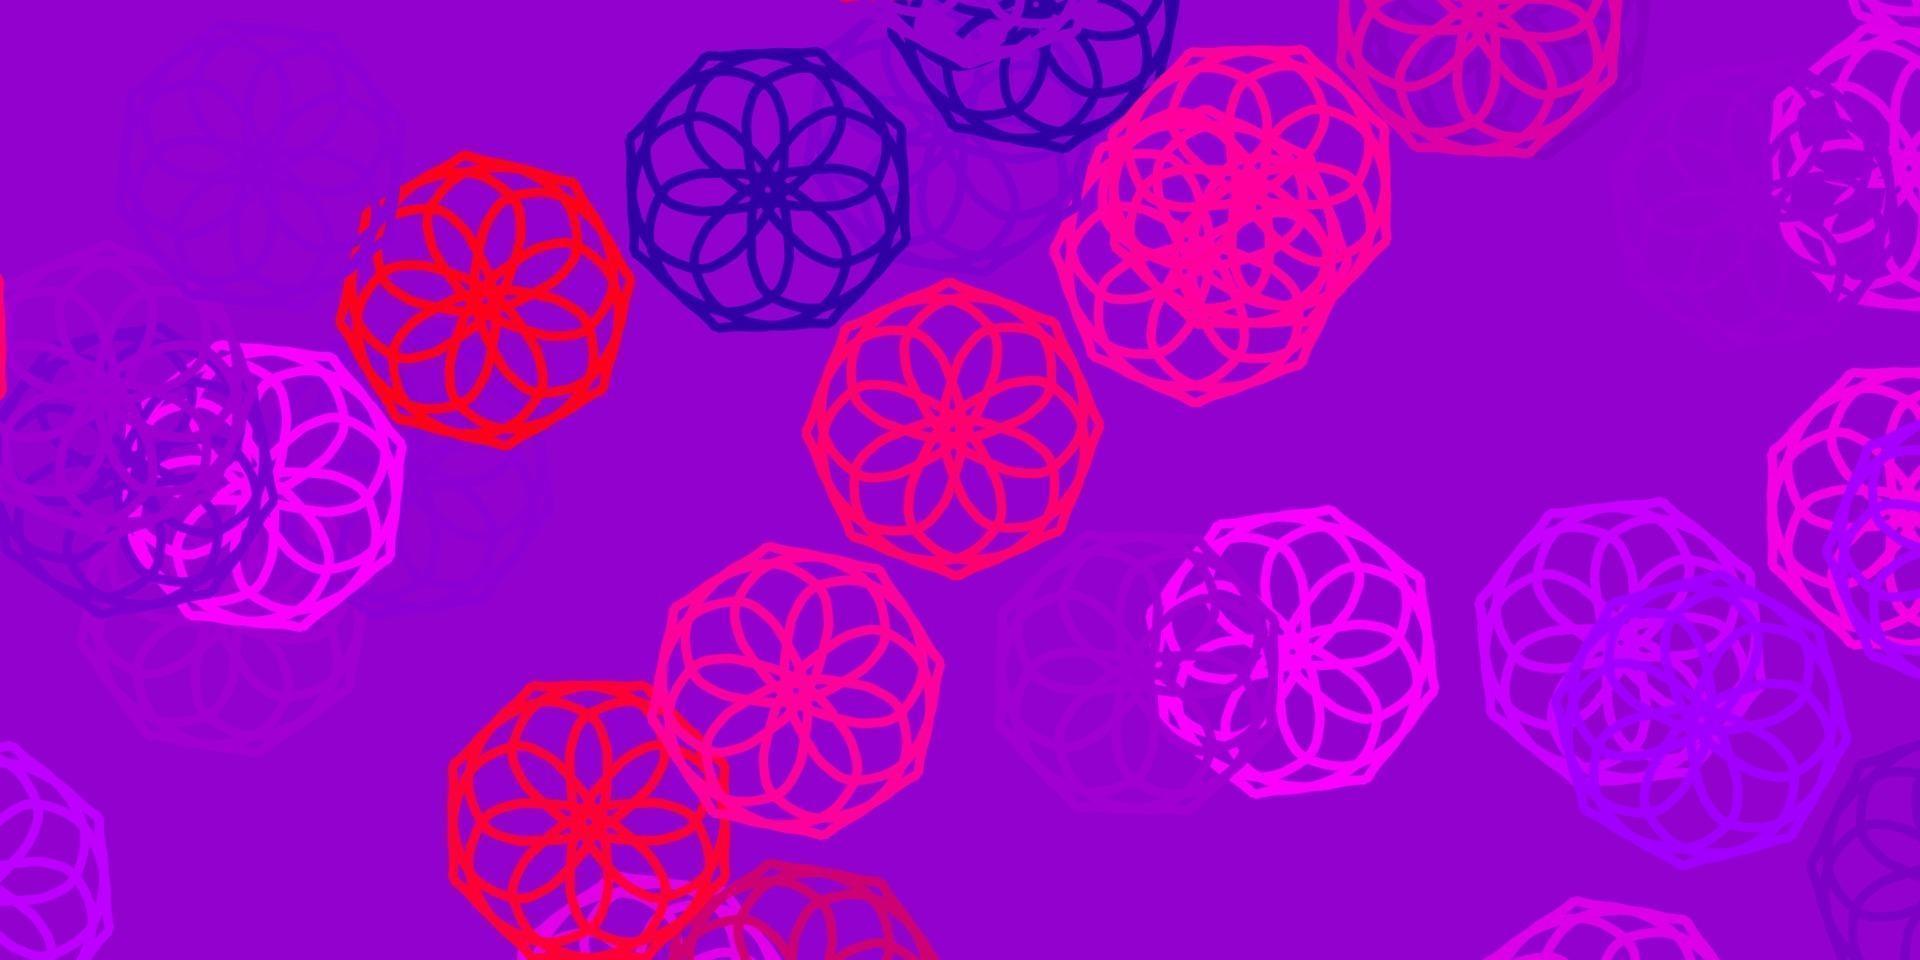 Light Purple, Pink vector doodle texture with flowers.